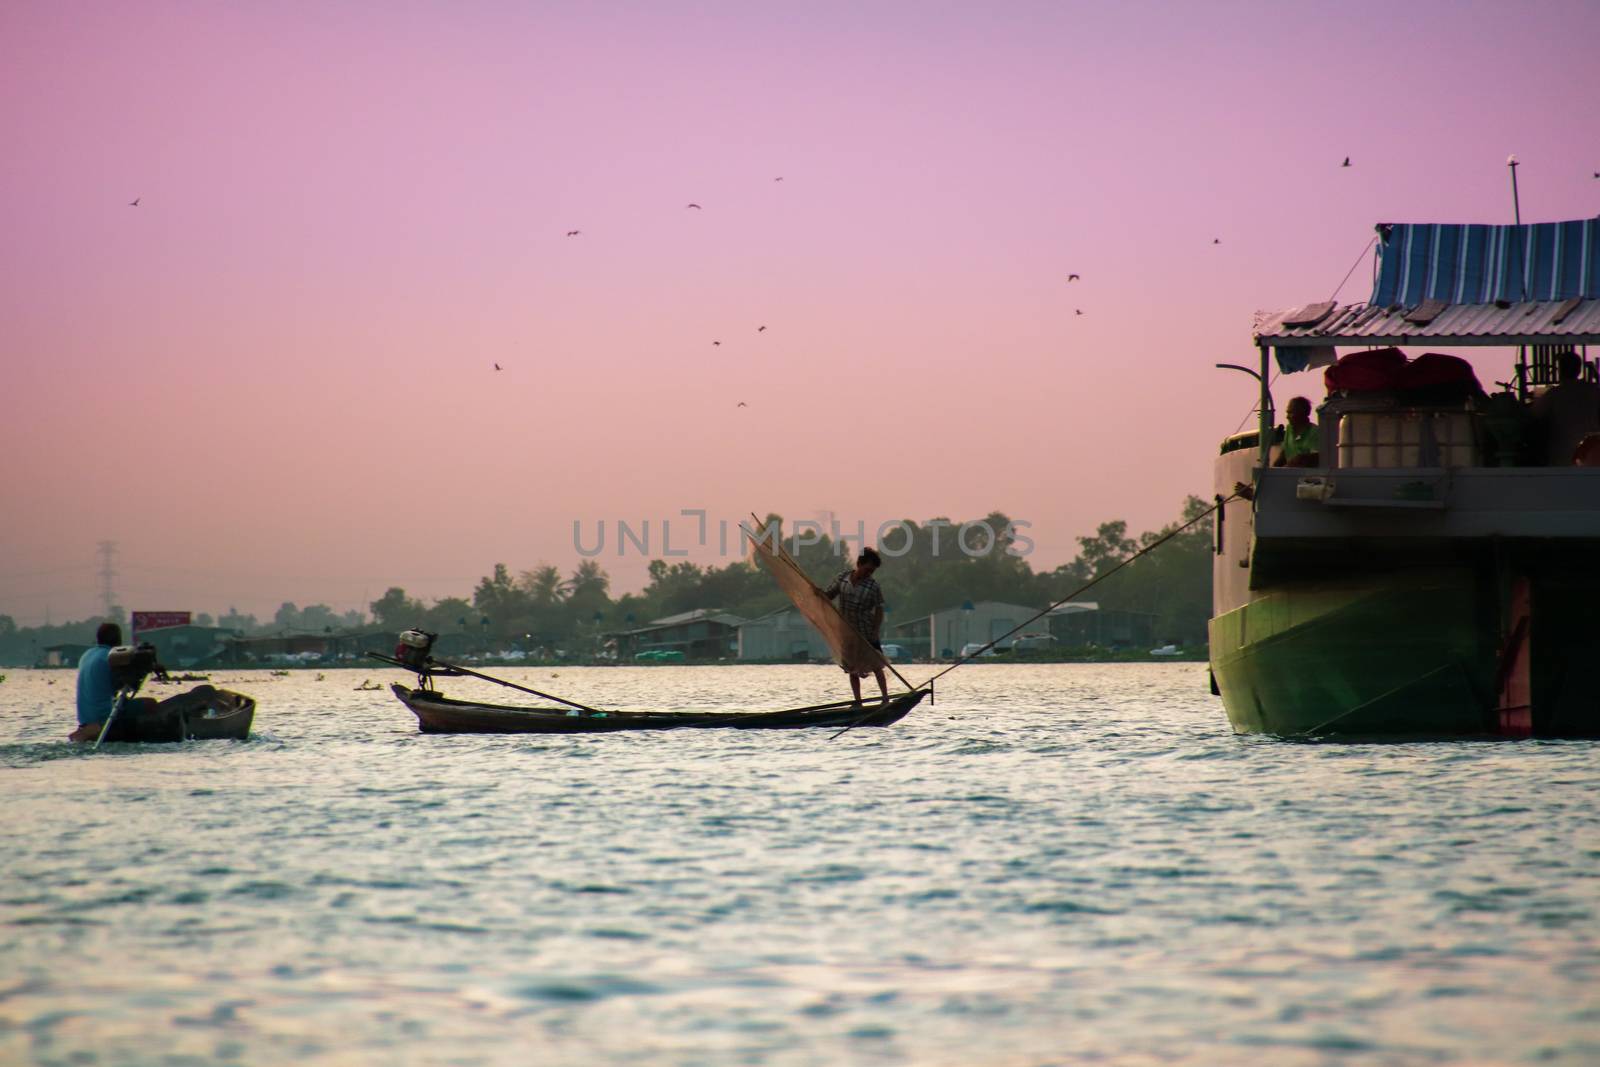 A fisherman on his boat along the Mekong River during the sunset